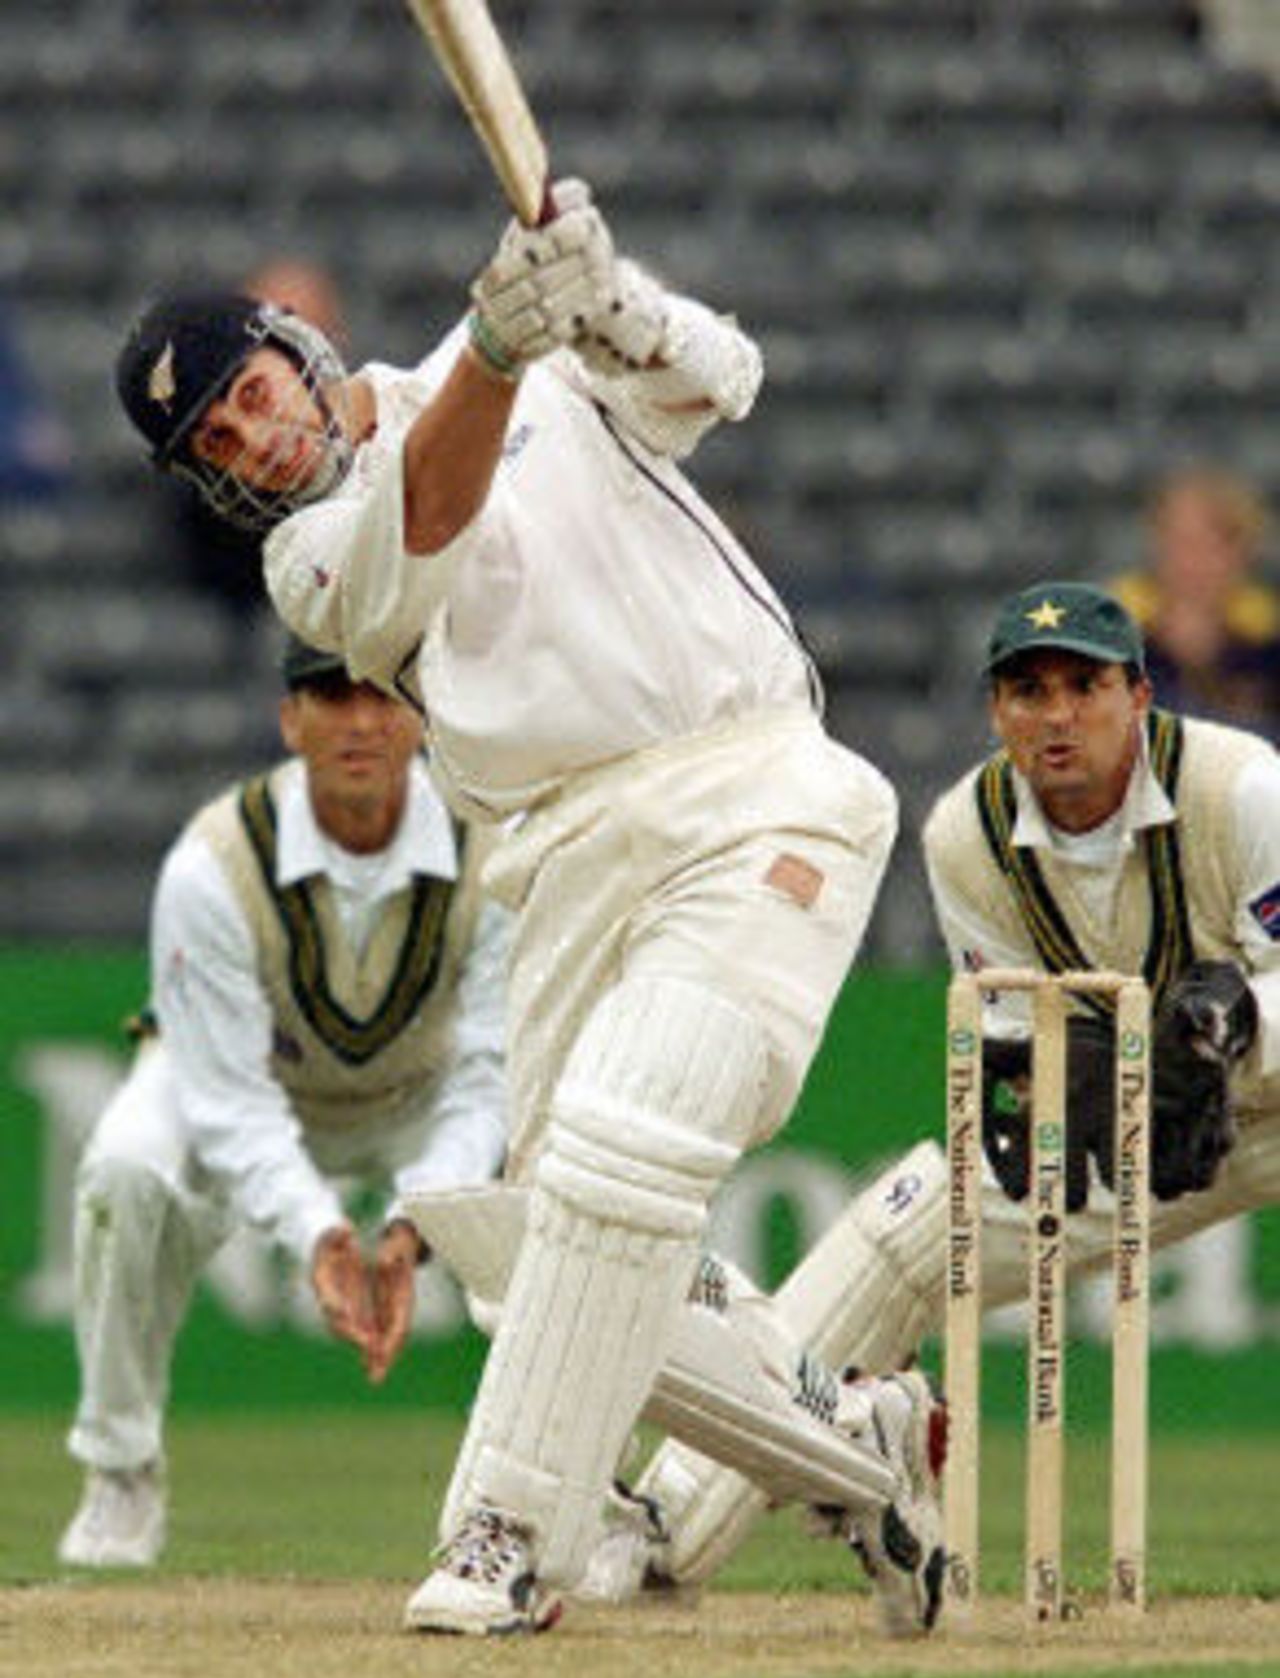 New Zealand batsman Mathew Sinclair lofts a ball for six runs on his way to scoring a century as Pakistan captain Moin Khan and Younis Khan look on on the first day of the second Test Match being played in Christchurch 15 March 2001. New Zealand batting in their first inning was 284-5 at stumps with Sinclair not out on 100.